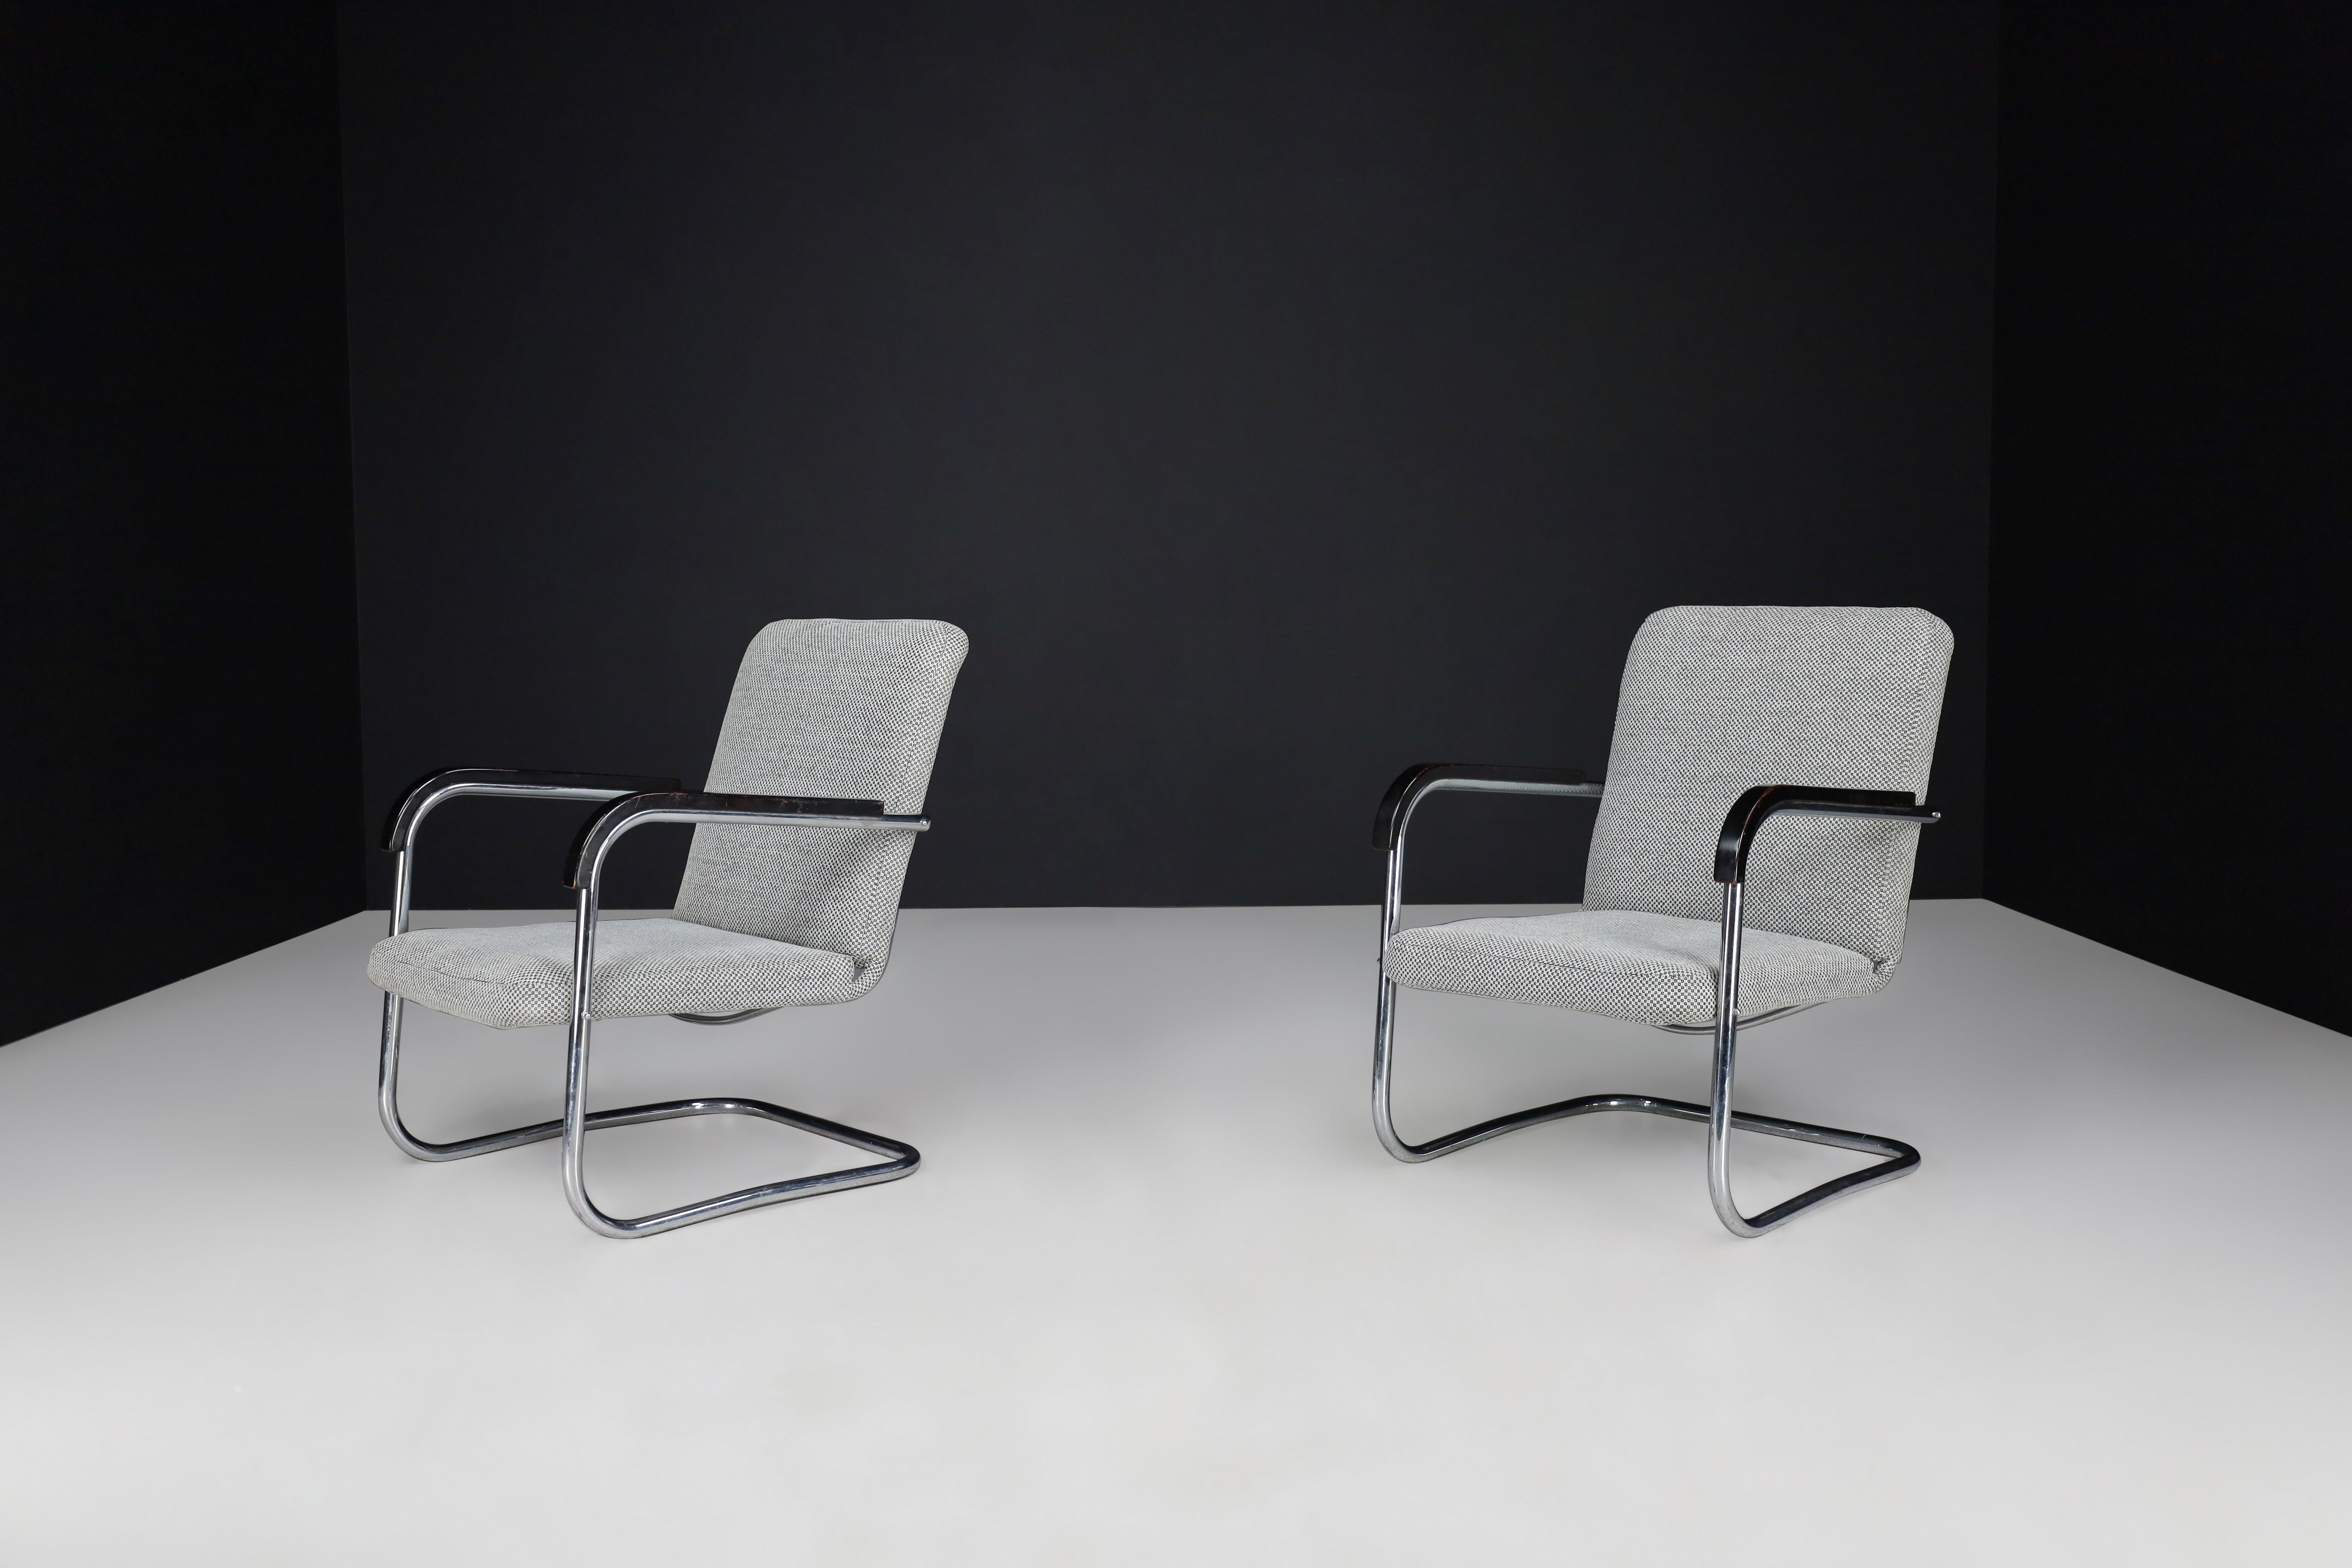 20th Century Thonet Chrome Steel Cantilever Armchairs 1930s Midcentury Bauhaus period. For Sale